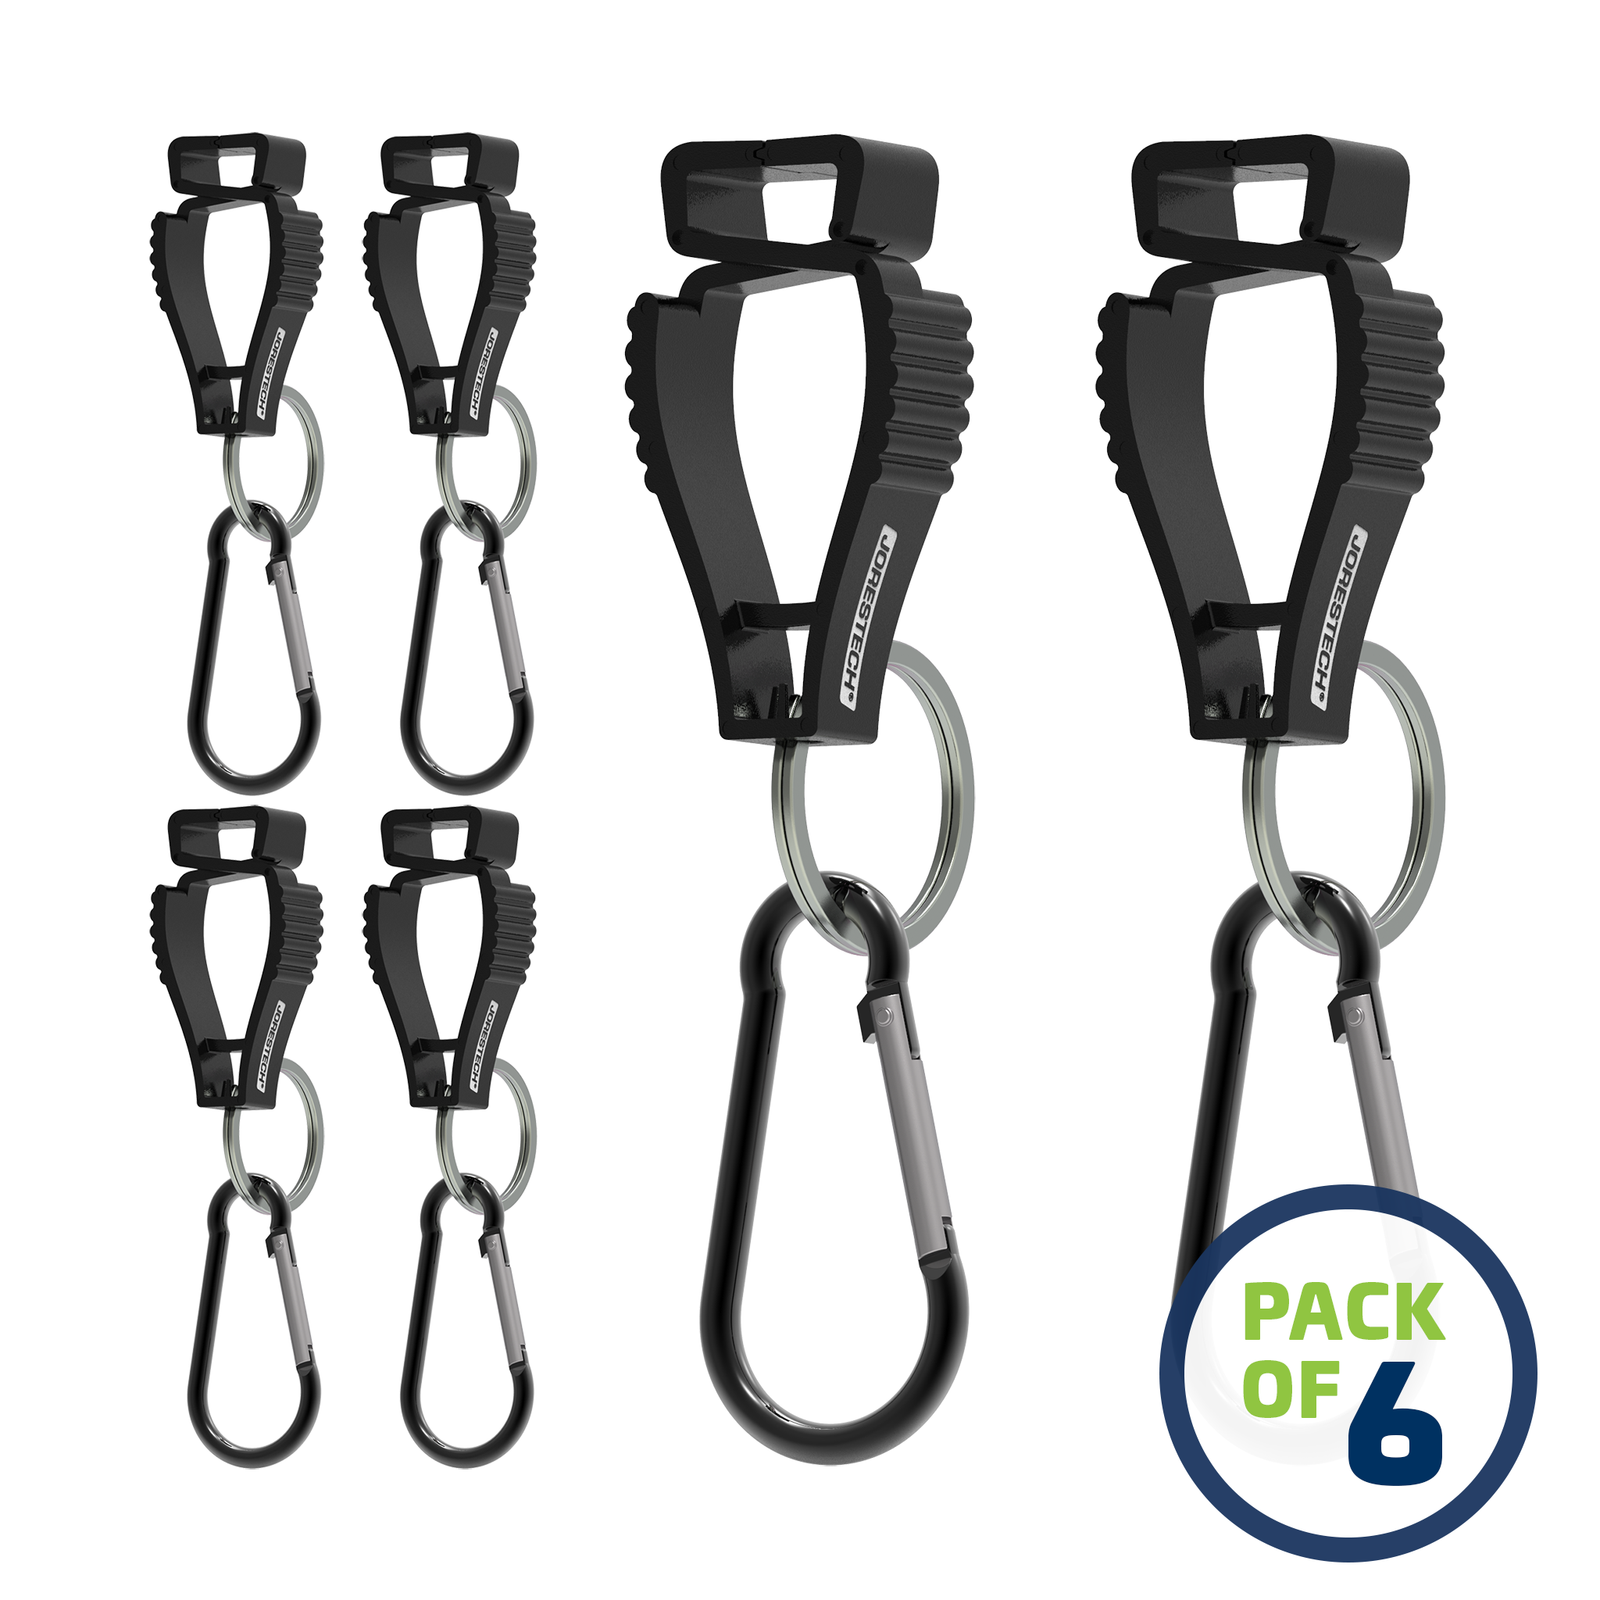 image of a pack of 6 Black JORESTECH glove clip safety holders with carabiner over white background